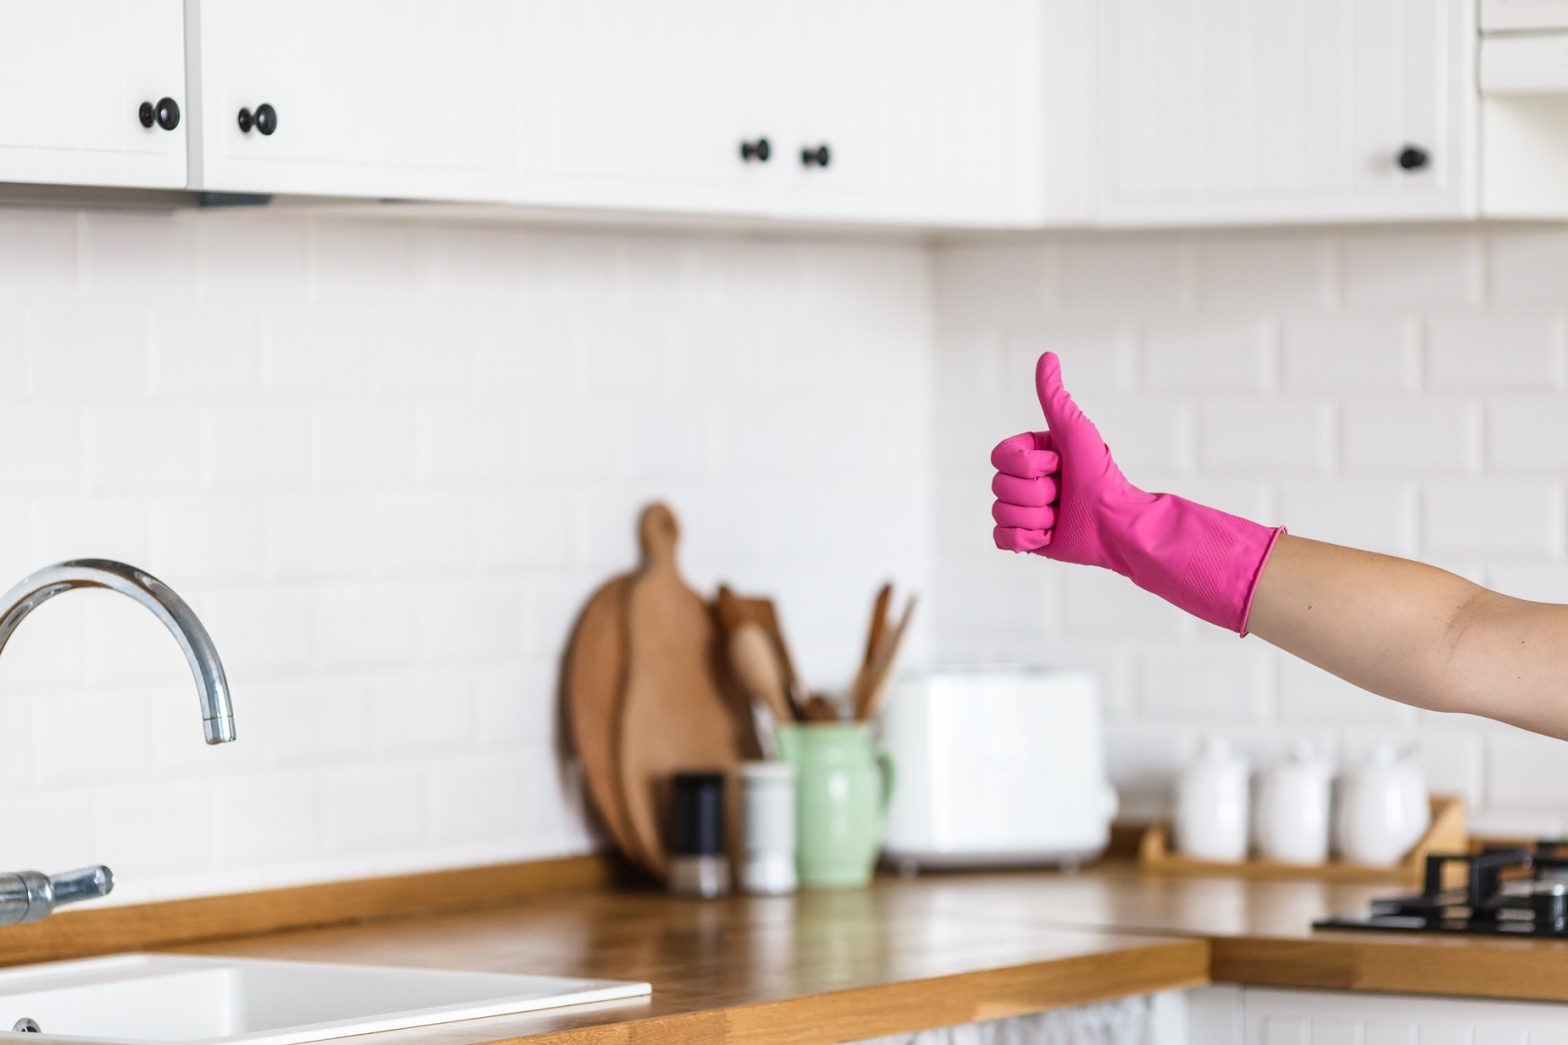 Clean kitchen backsplash tiles with hand showing thumbs up